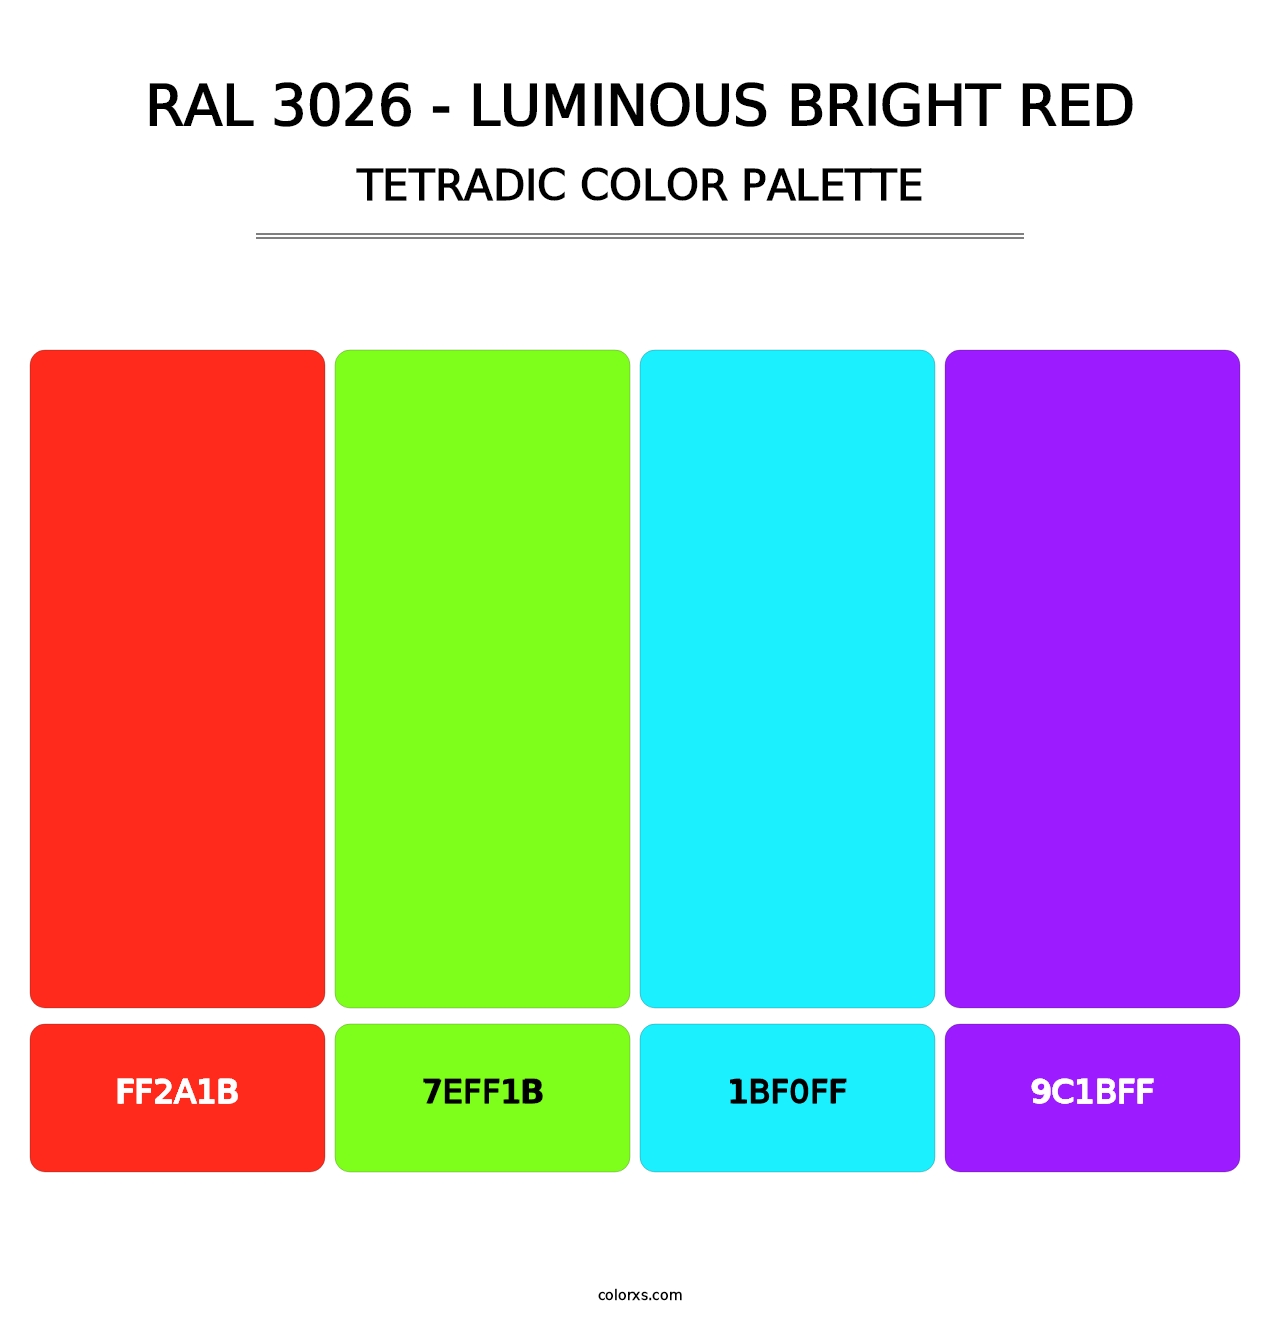 RAL 3026 - Luminous Bright Red - Tetradic Color Palette